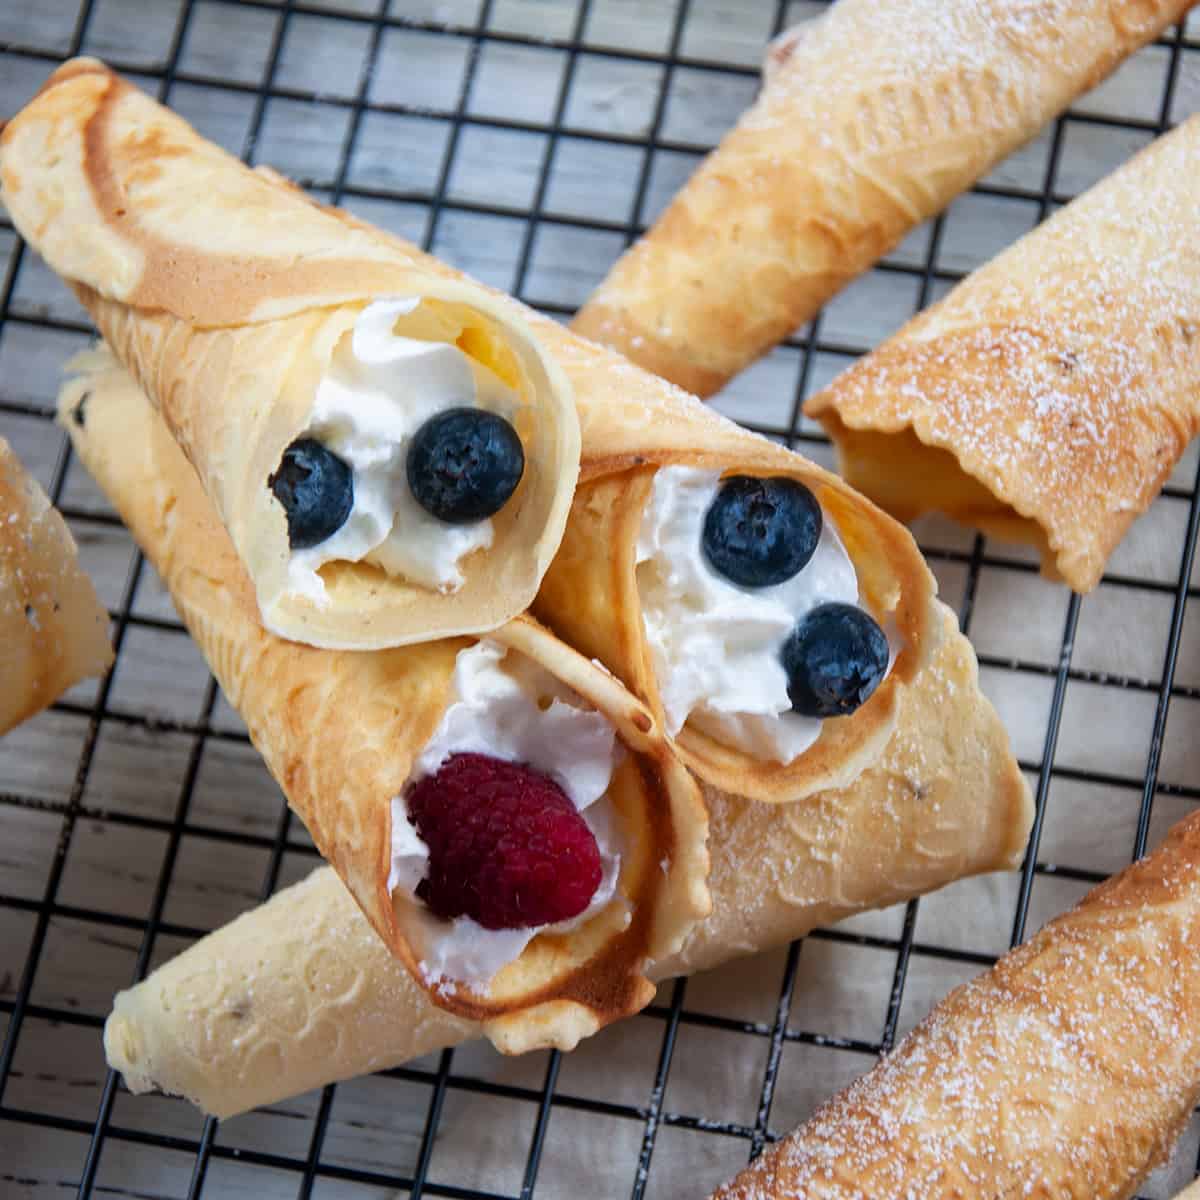 Three Krumkake filled with whipped cream, blueberries, and raspberries that are laying on top of several unfilled ones that have been sprinkled with powdered sugar.